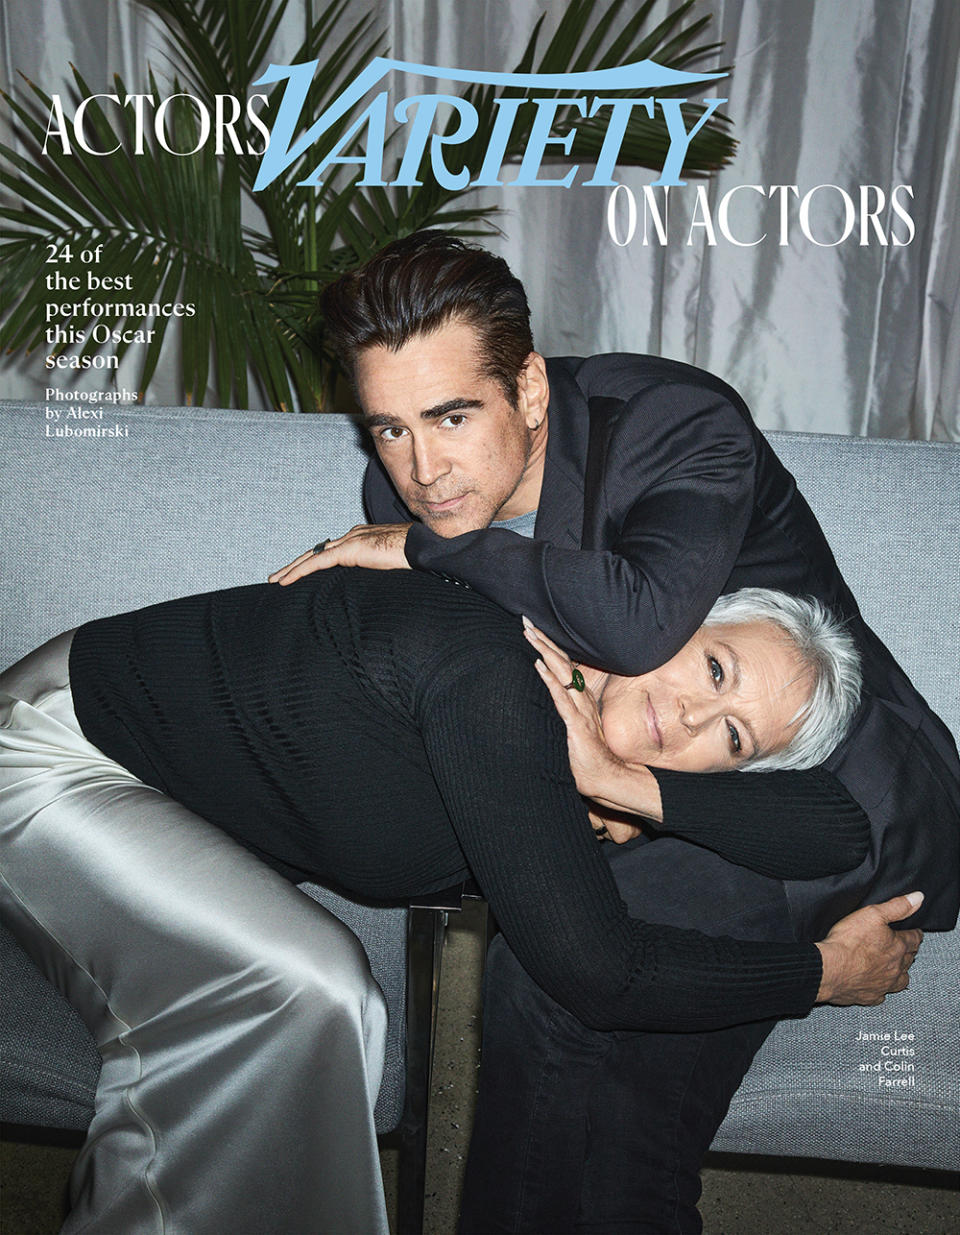 Colin Farrell and Jamie Lee Curtis Variety Actors on Actors Cover 2022